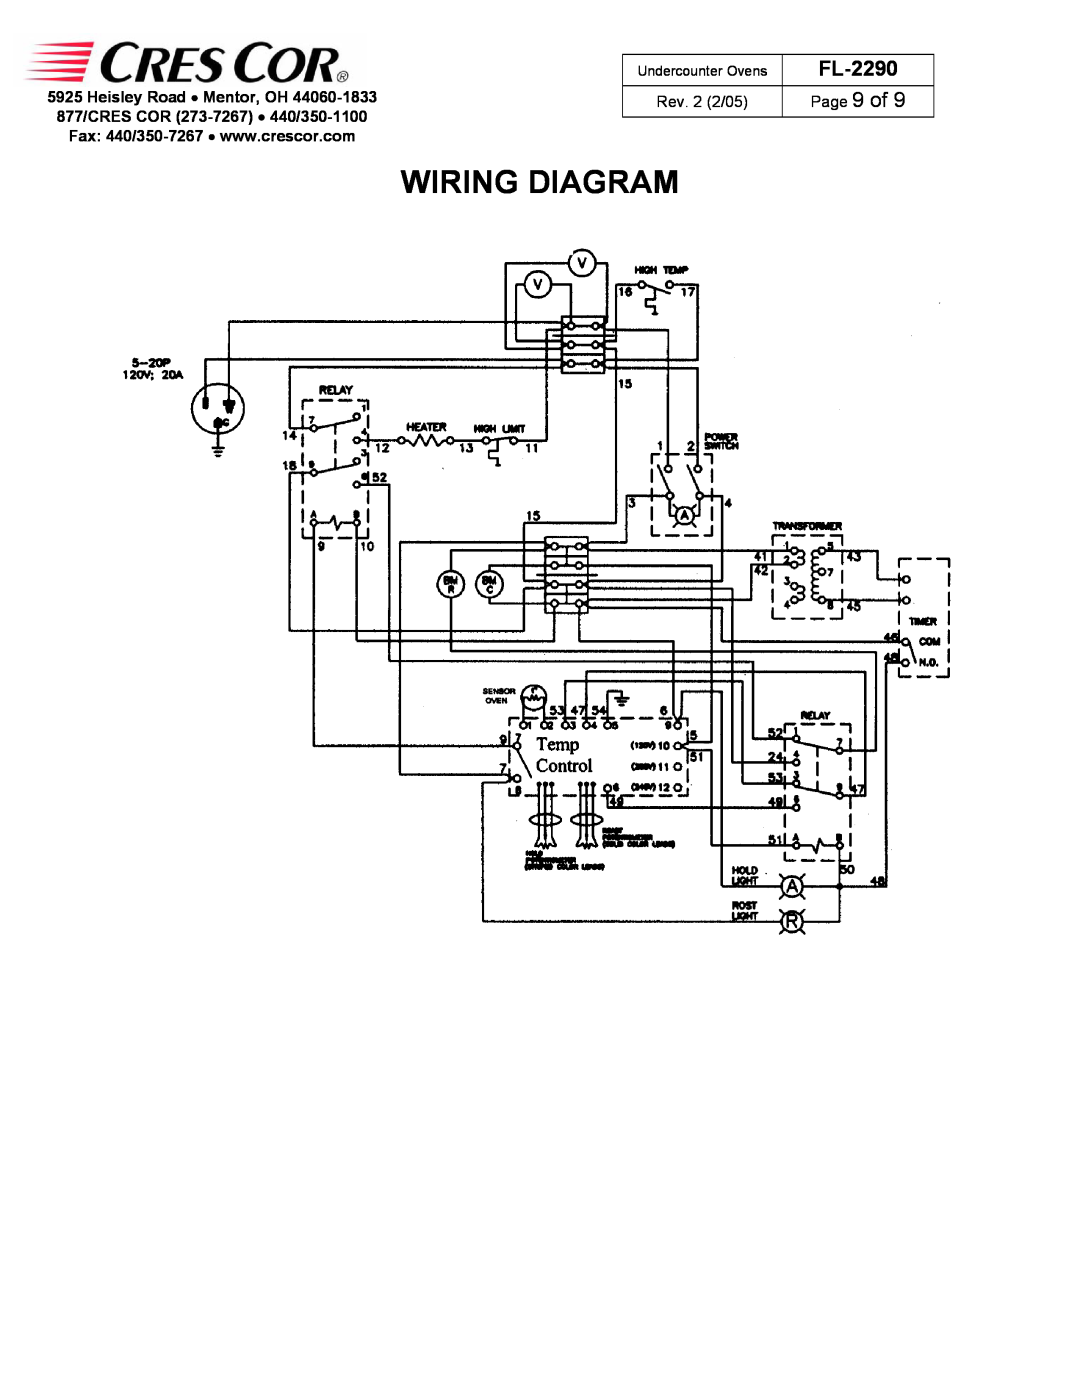 Cres Cor CO151XUA5B, CO151X185B manual Wiring Diagram, FL-2290, Page 9 of, Rev. 2 2/05, Undercounter Ovens 